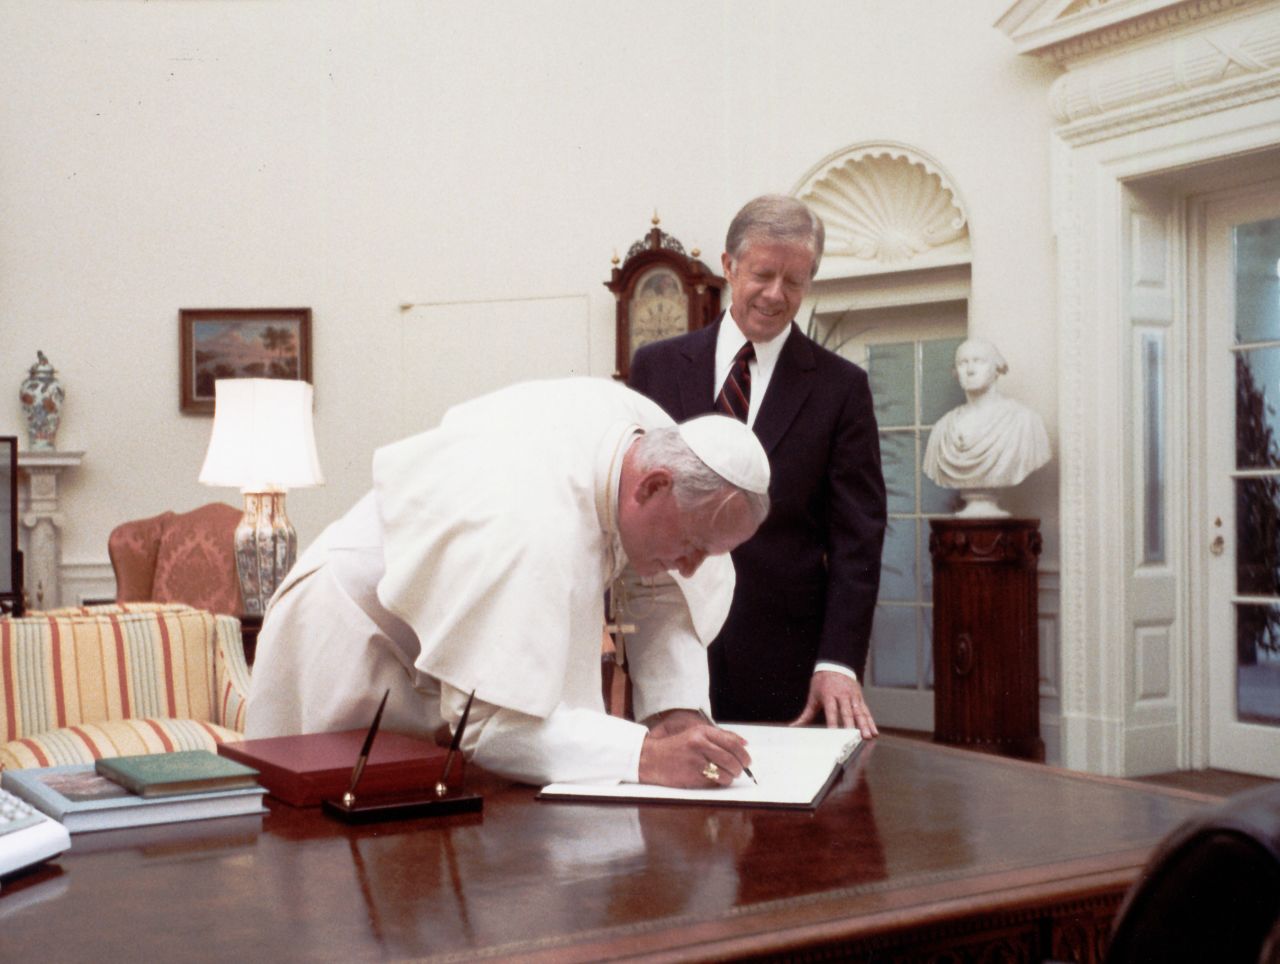 President Jimmy Carter watches Pope John Paul II sign the White House guest book in 1979. He was the first Pope to visit the White House.